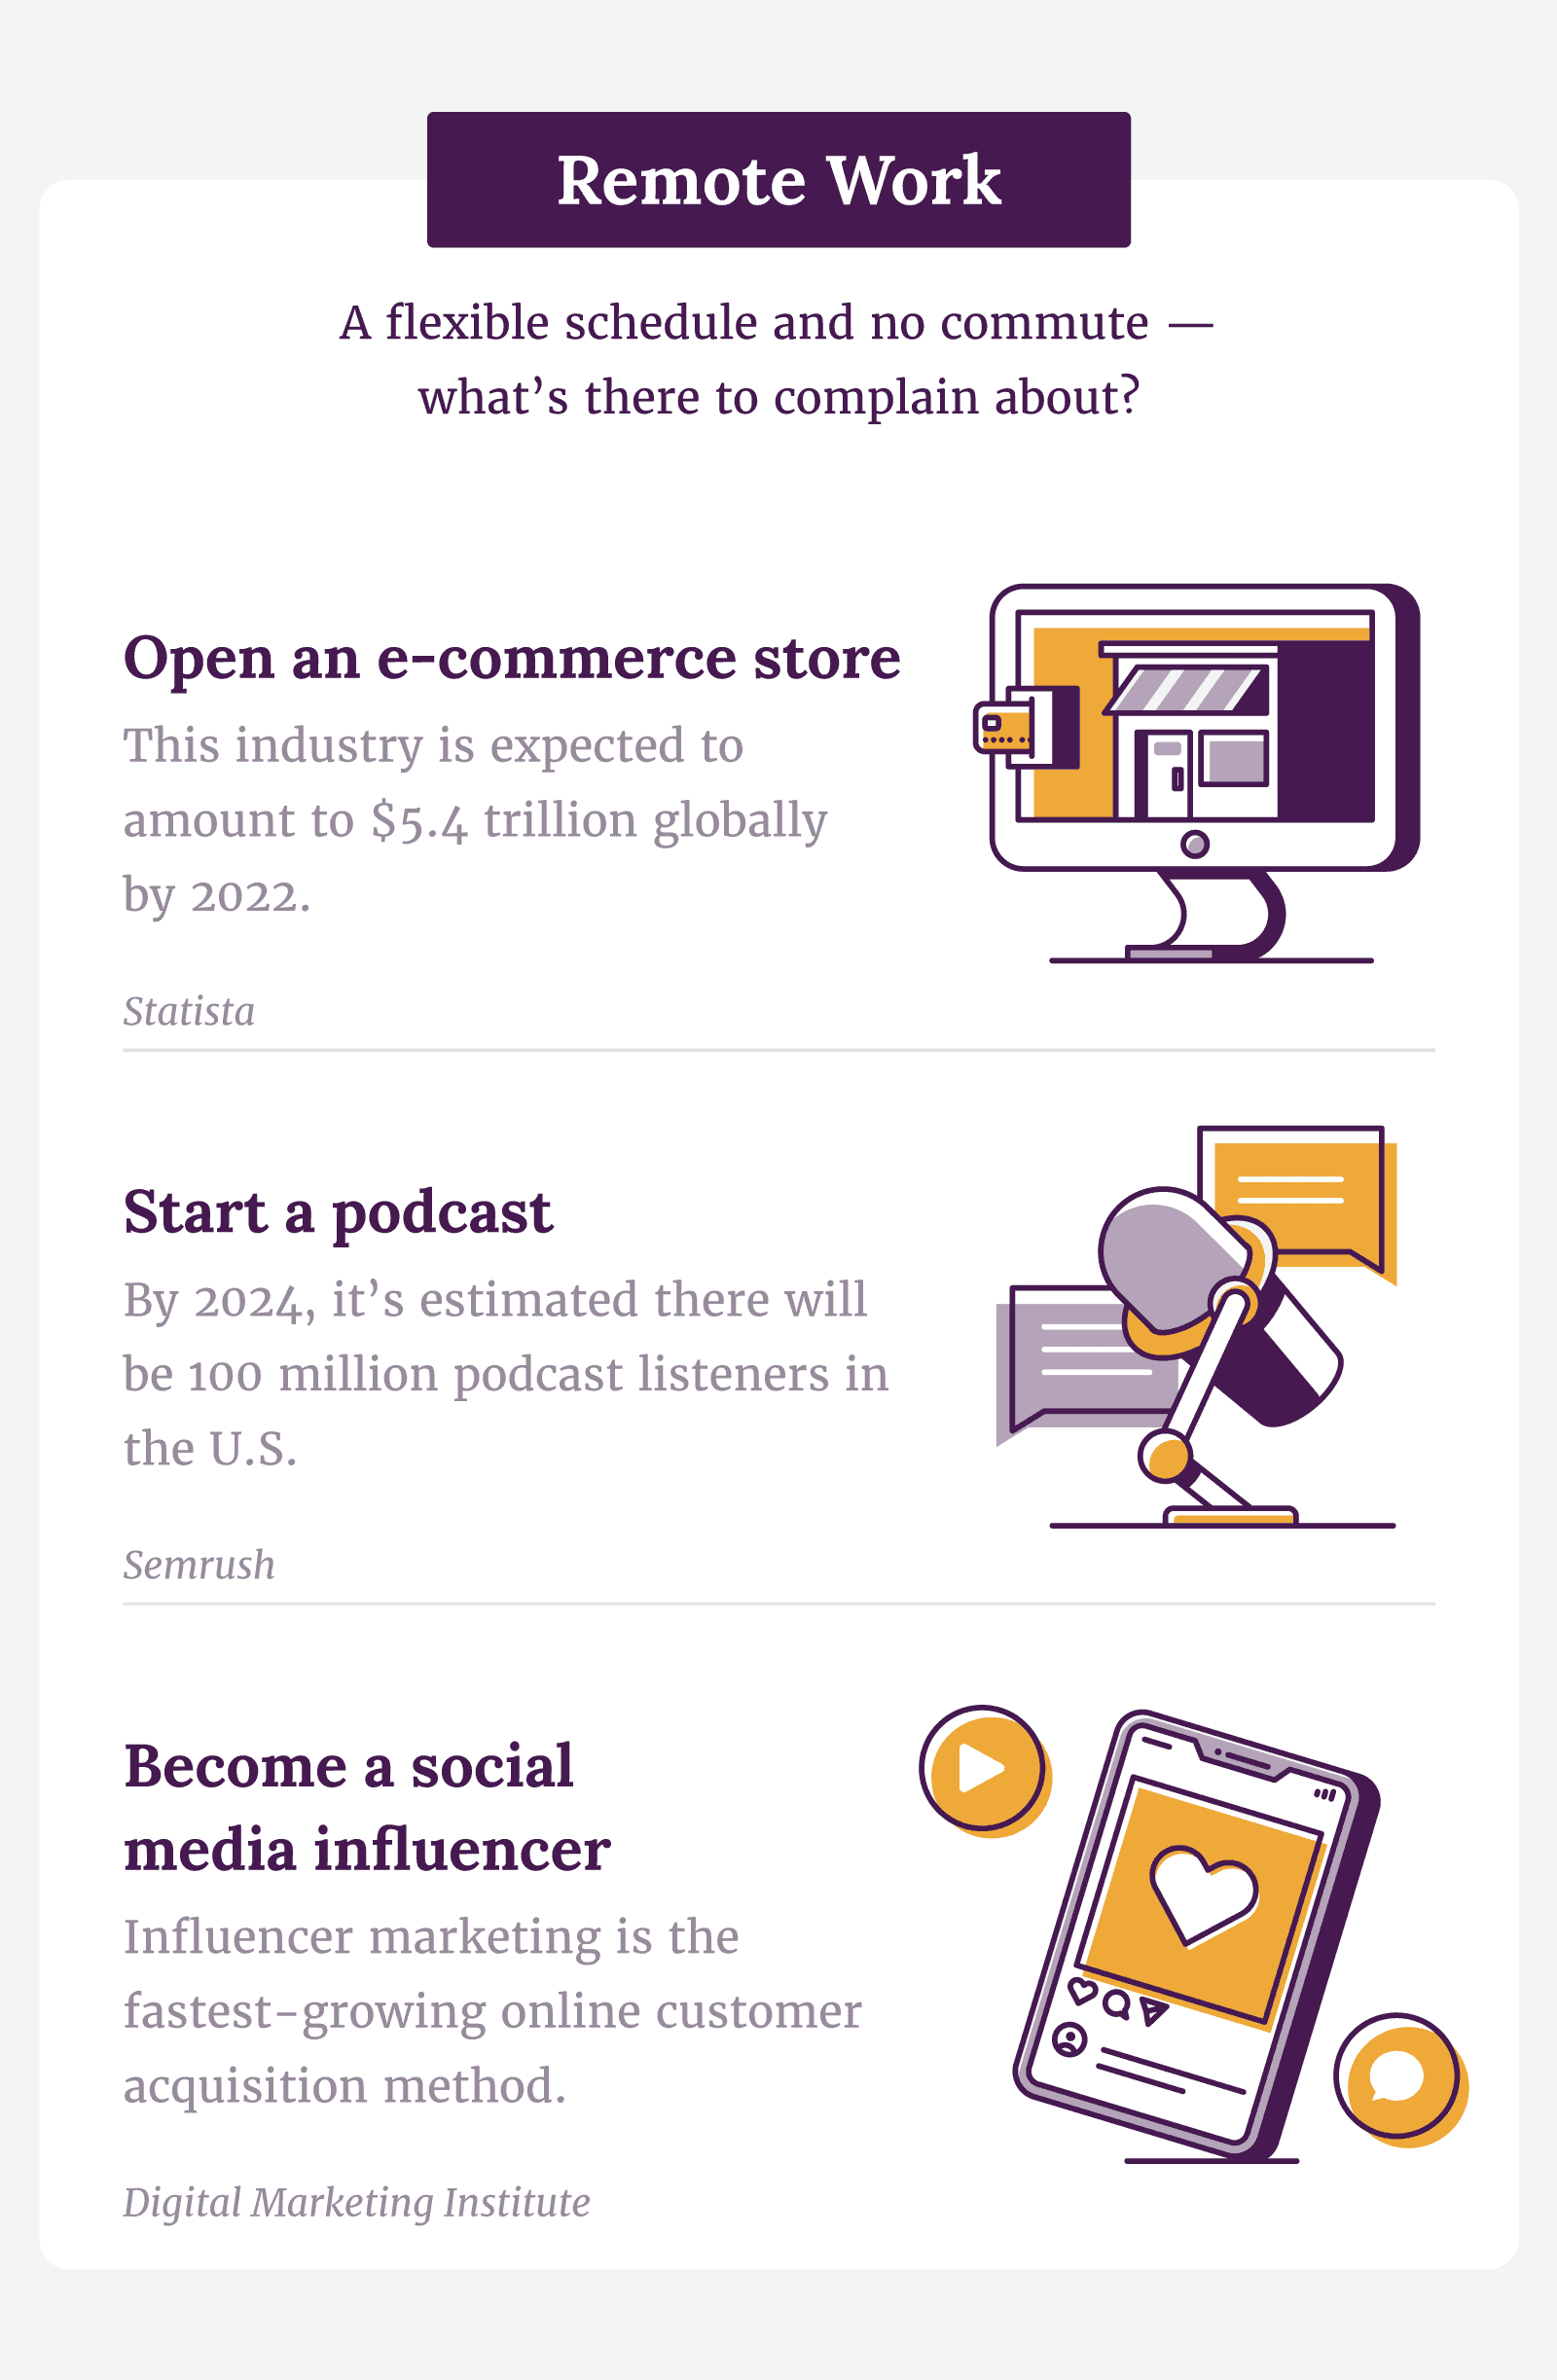 Three small business ideas that are all remote, including starting an e-commerce store, beginning a podcaster, or becoming a social media influencer